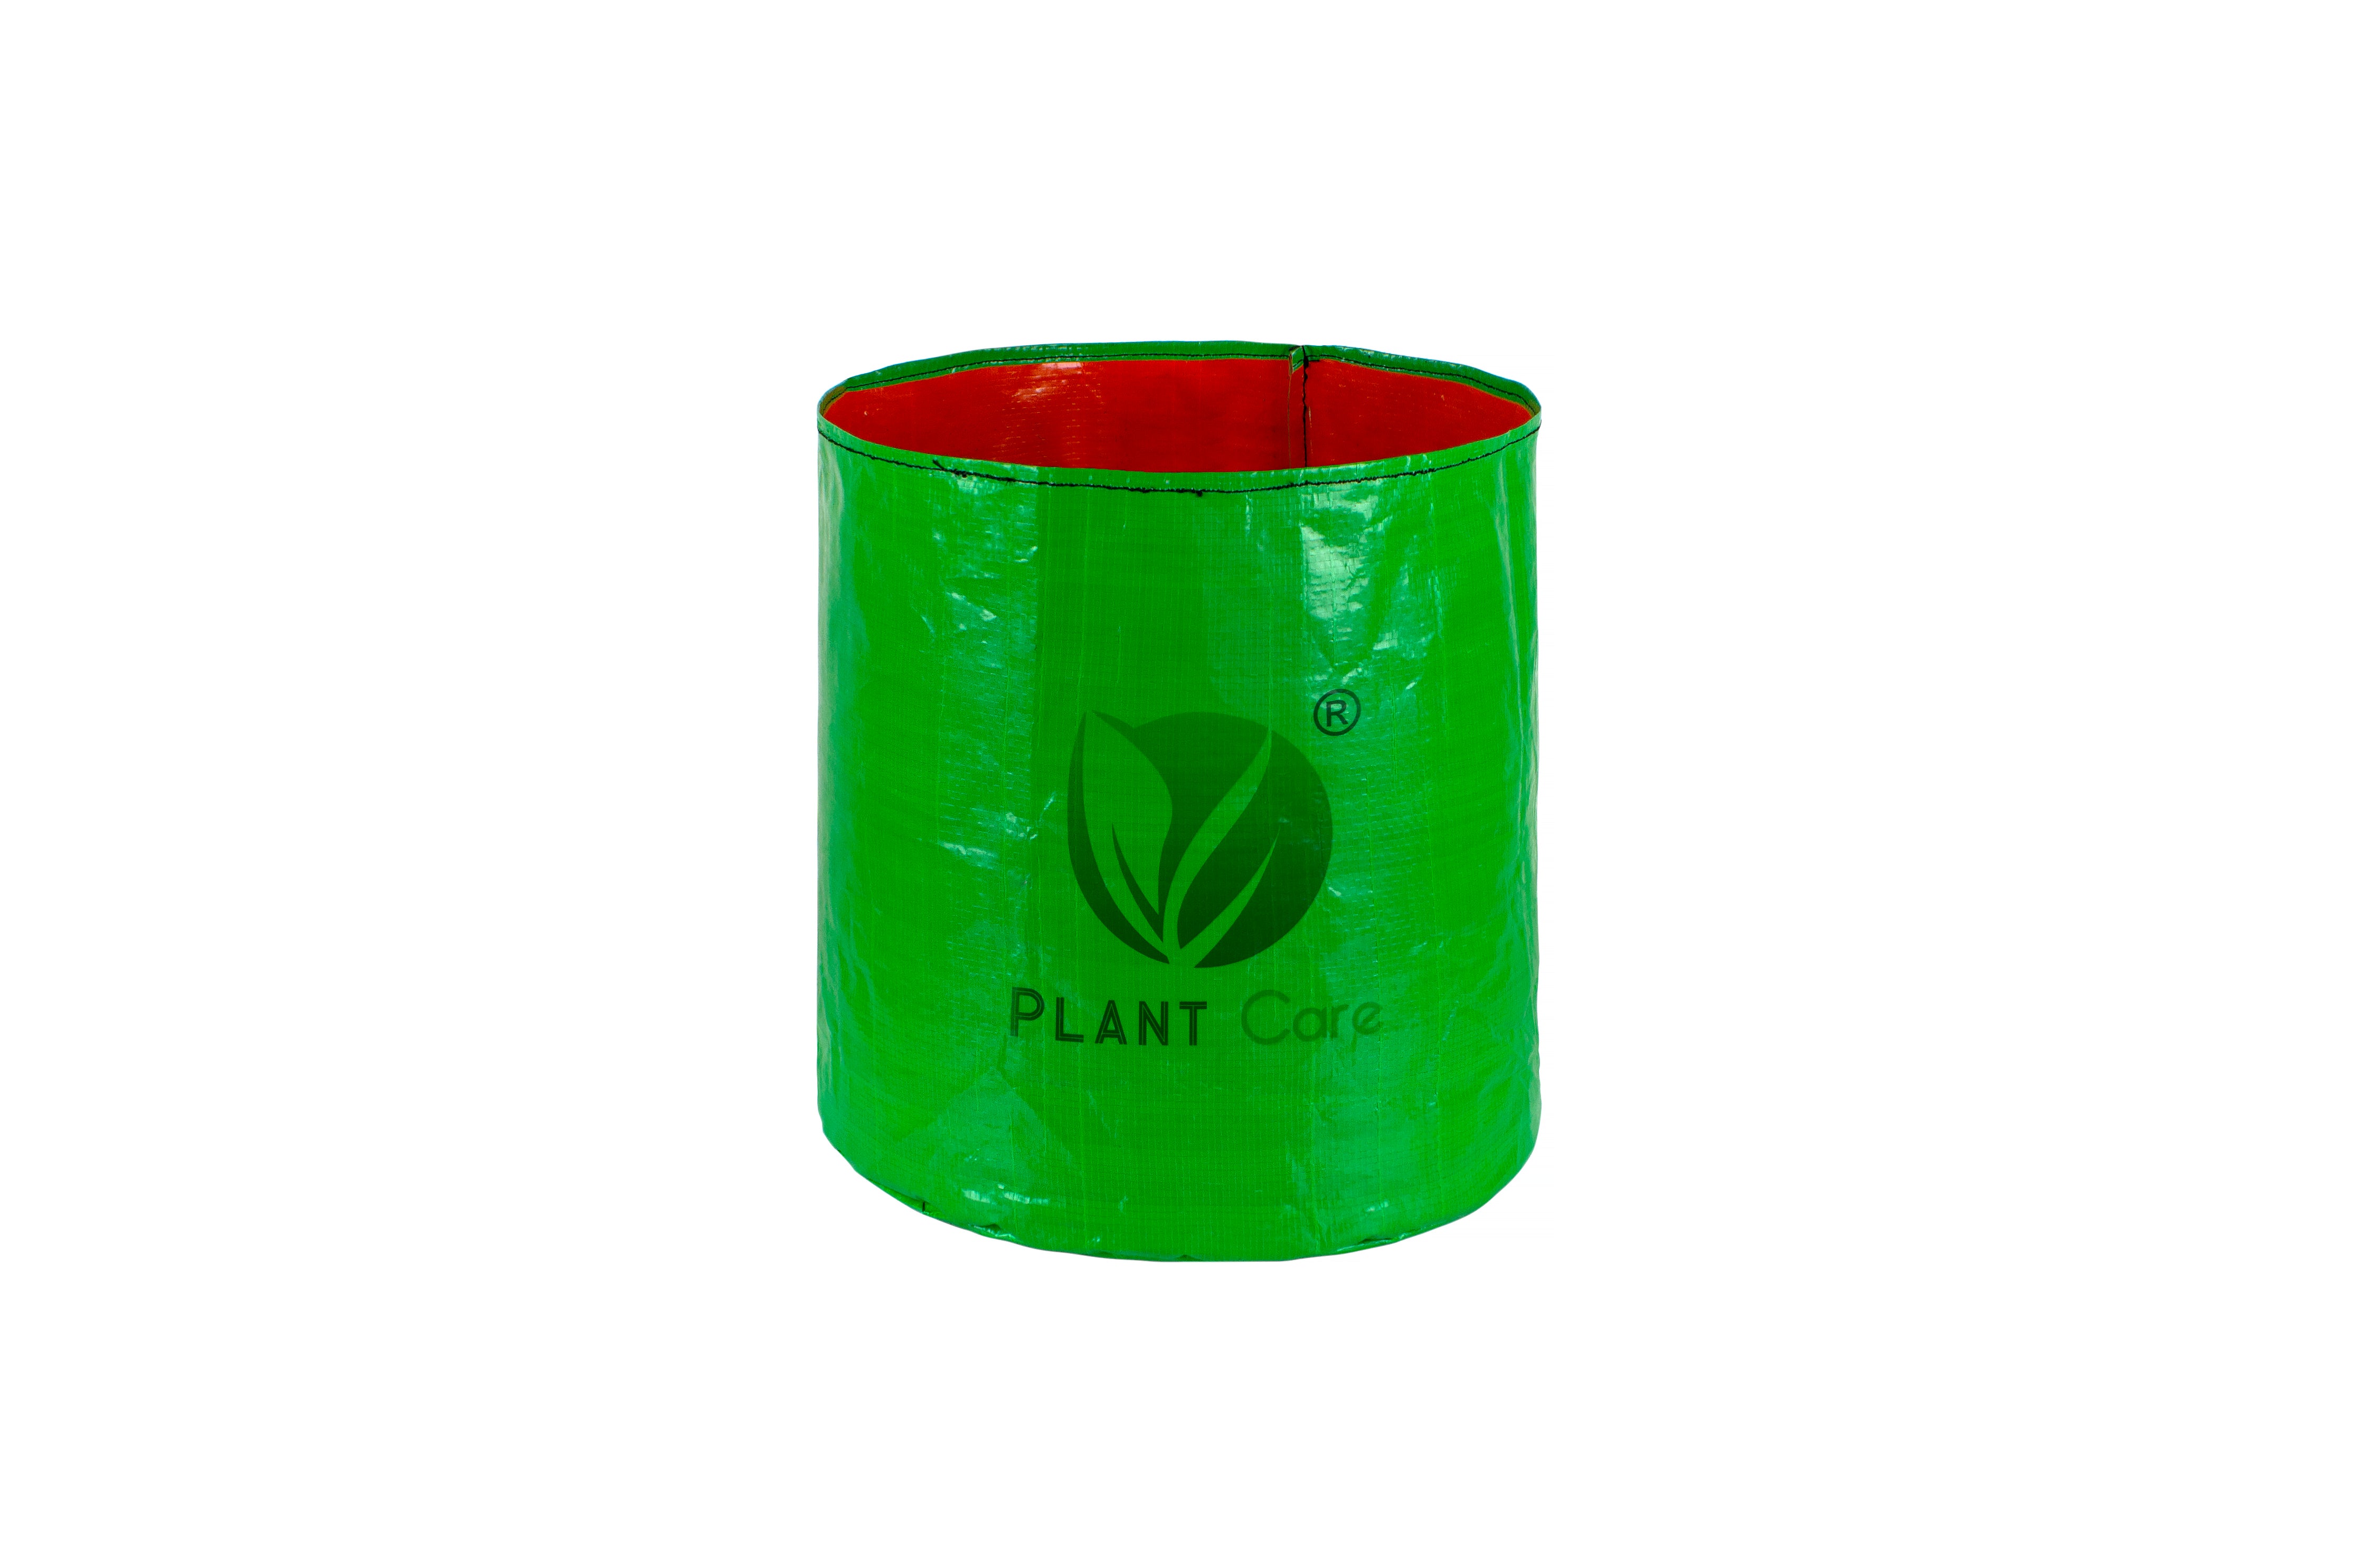 A 18-inch round grow bag for planting and growing your favorite plants